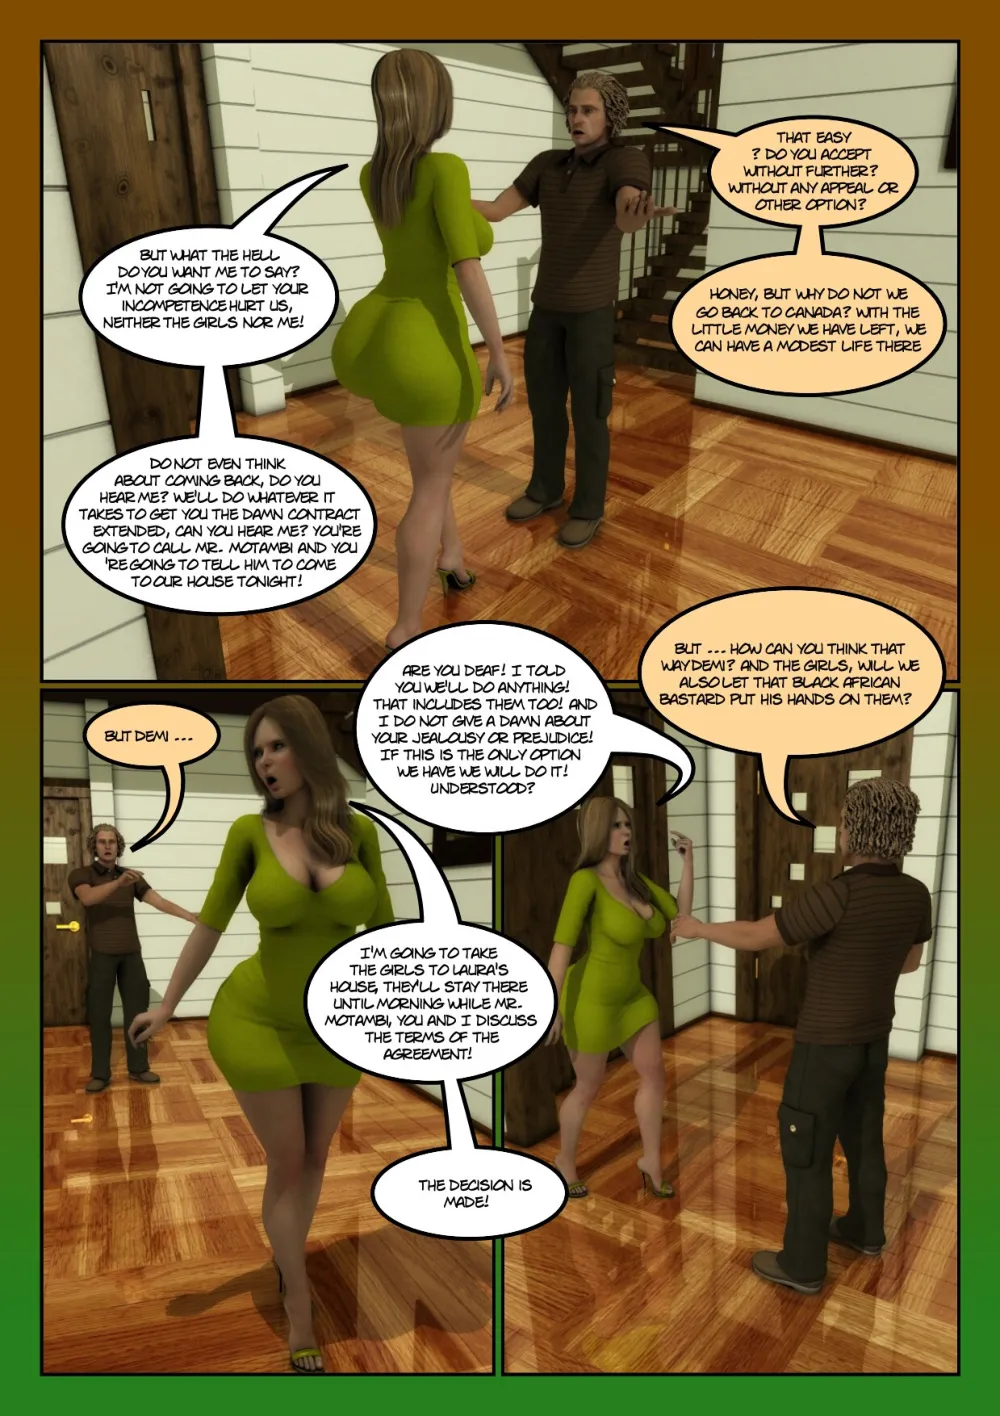 Africanized: File #1 - Page 2